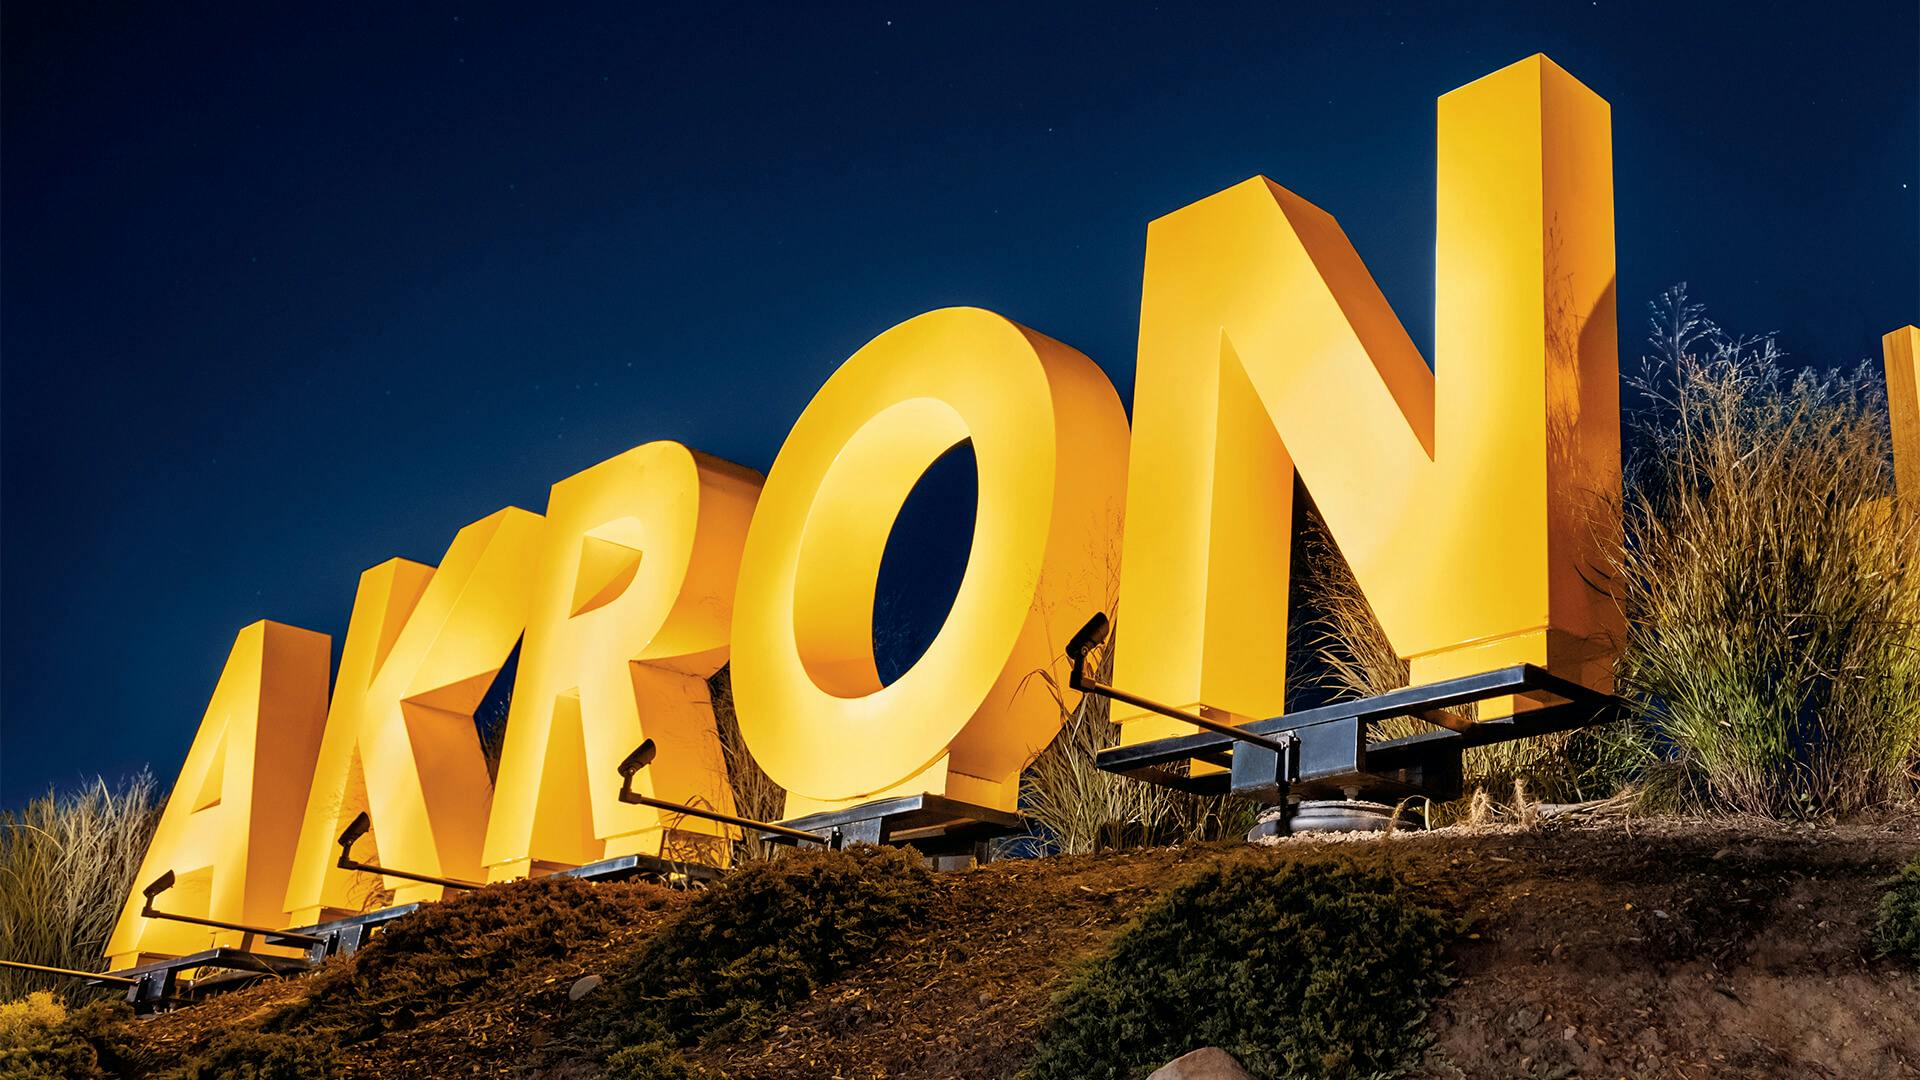 Close up on "Akron" part of the Akron Zoo sign, bright yellow letters with lights shining on each letter at night